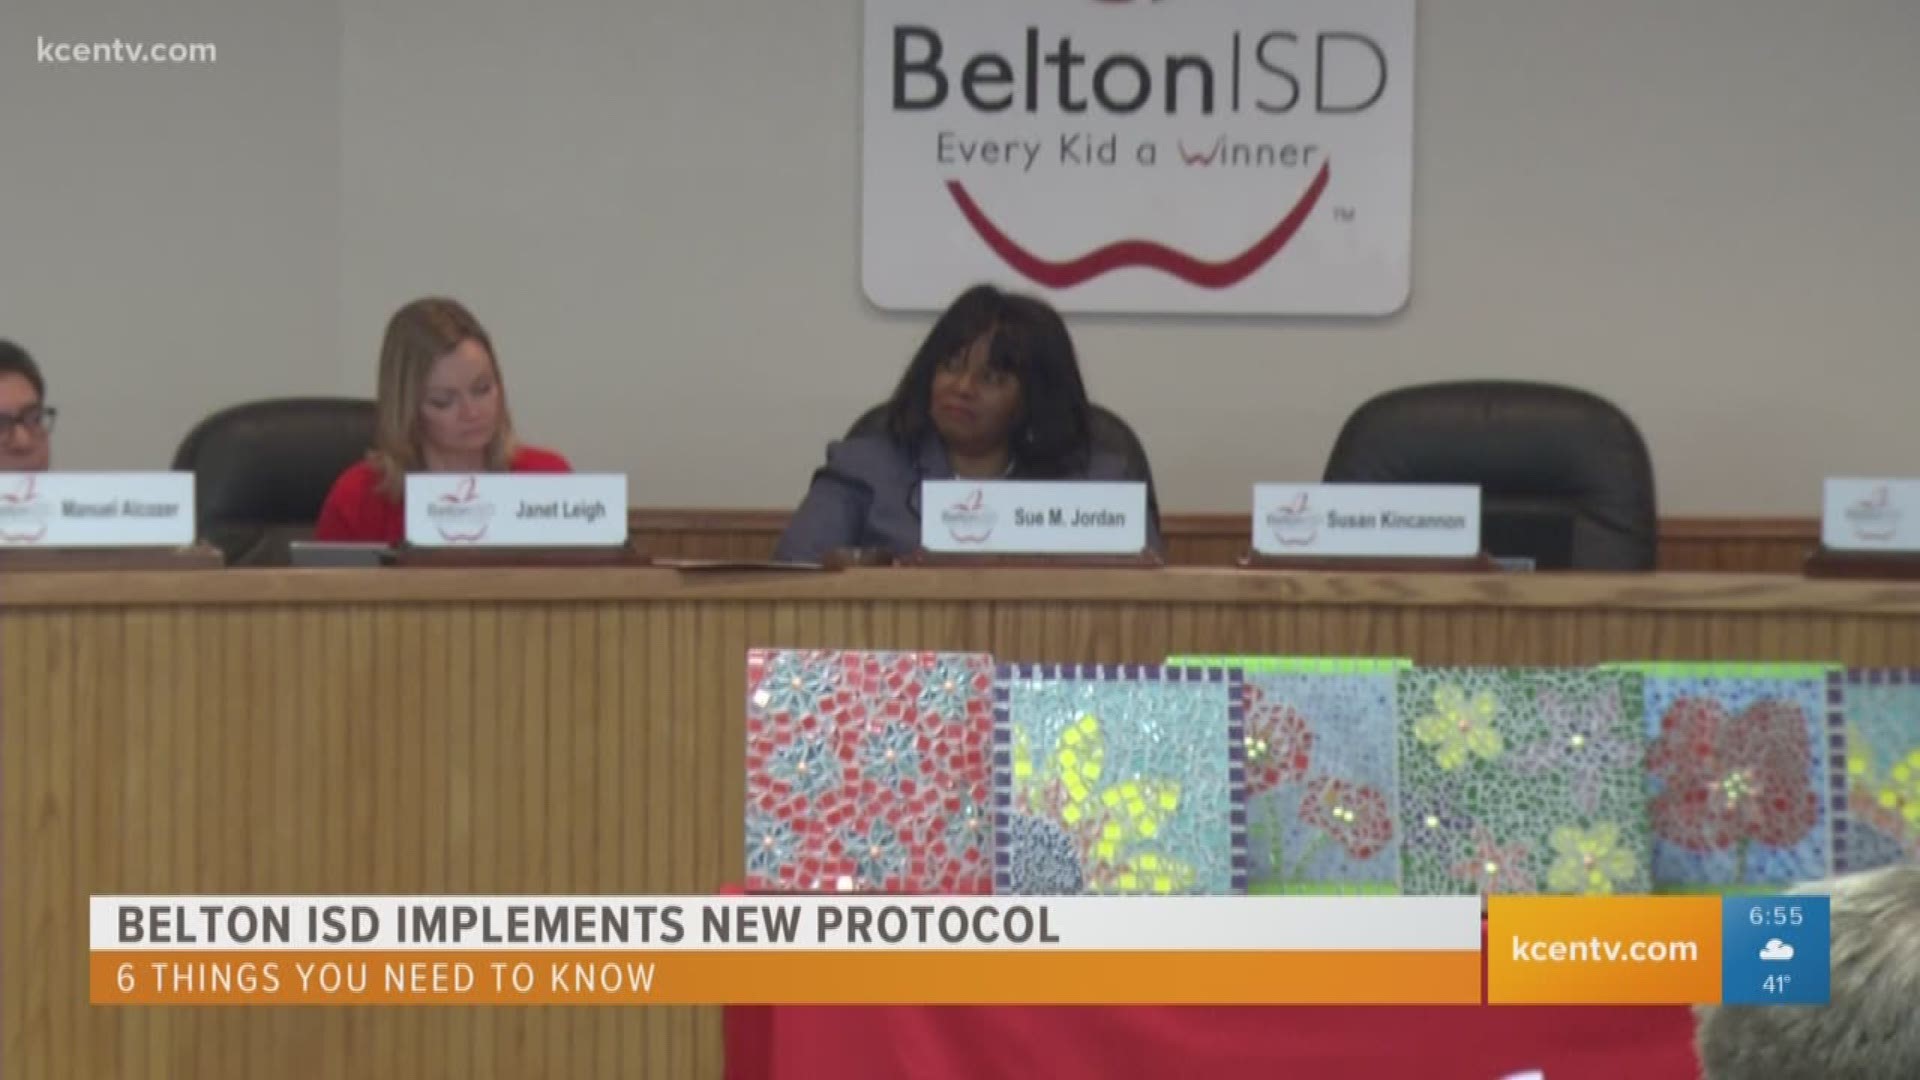 Before you go, there are 6 things you should know. Here's one of them: The Belton Independent School District approved new school attendance boundaries on Monday.